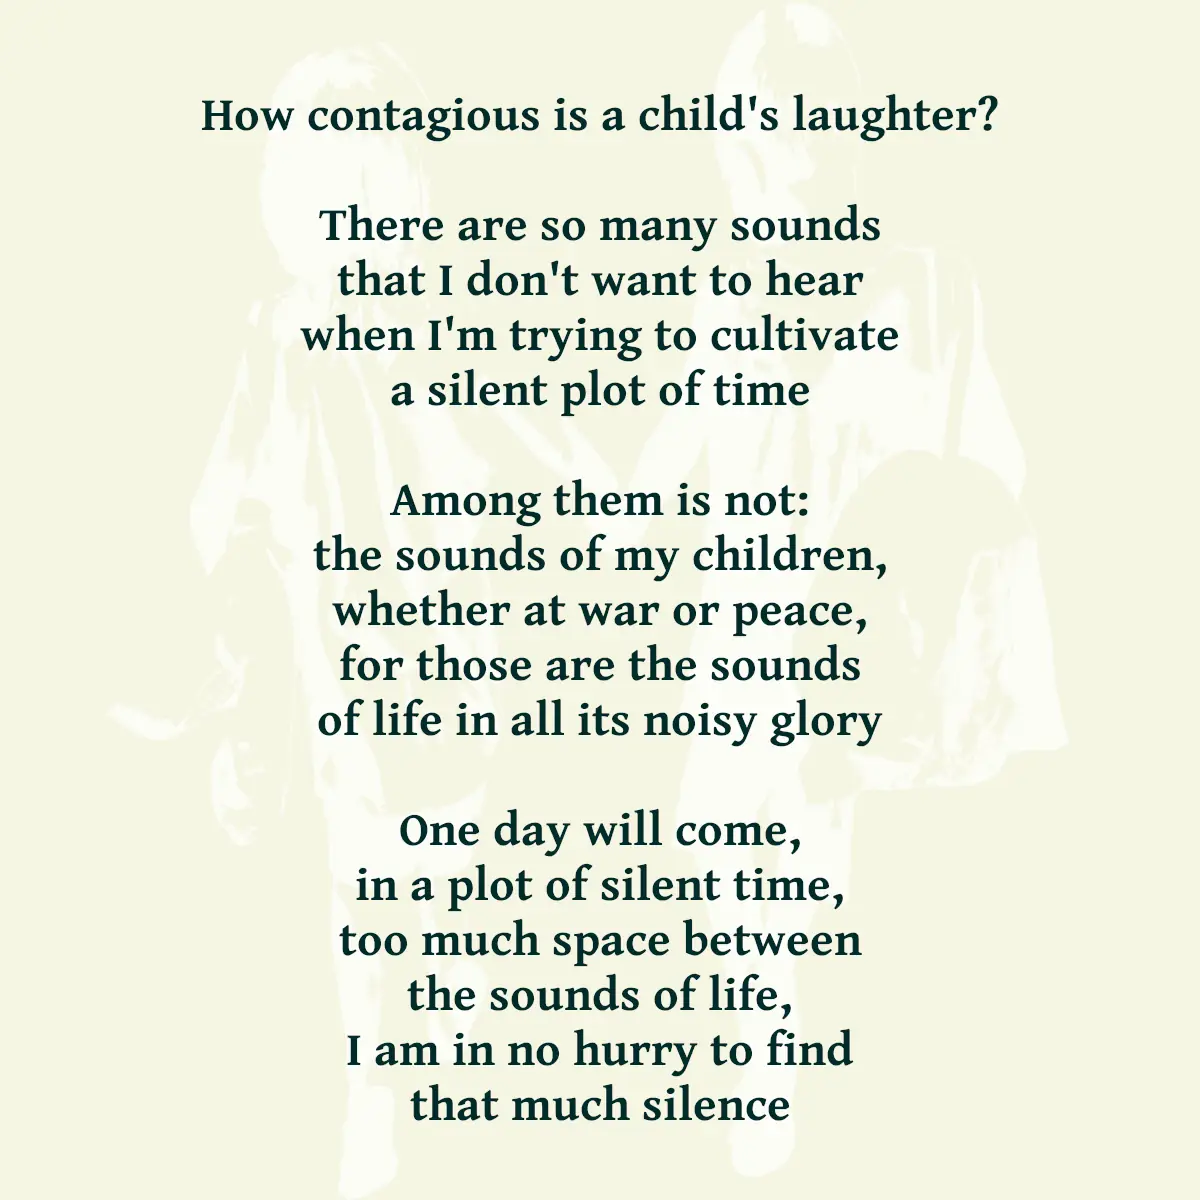 How contagious is a child's laughter? There are so many sounds that I don't want to hear when I'm trying to cultivate a silent plot of time Among them is not: the sounds of my children, whether at war or peace, for those are the sounds of life in all its noisy glory One day will come, in a plot of silent time, too much space between the sounds of life, I am in no hurry to find that much silence